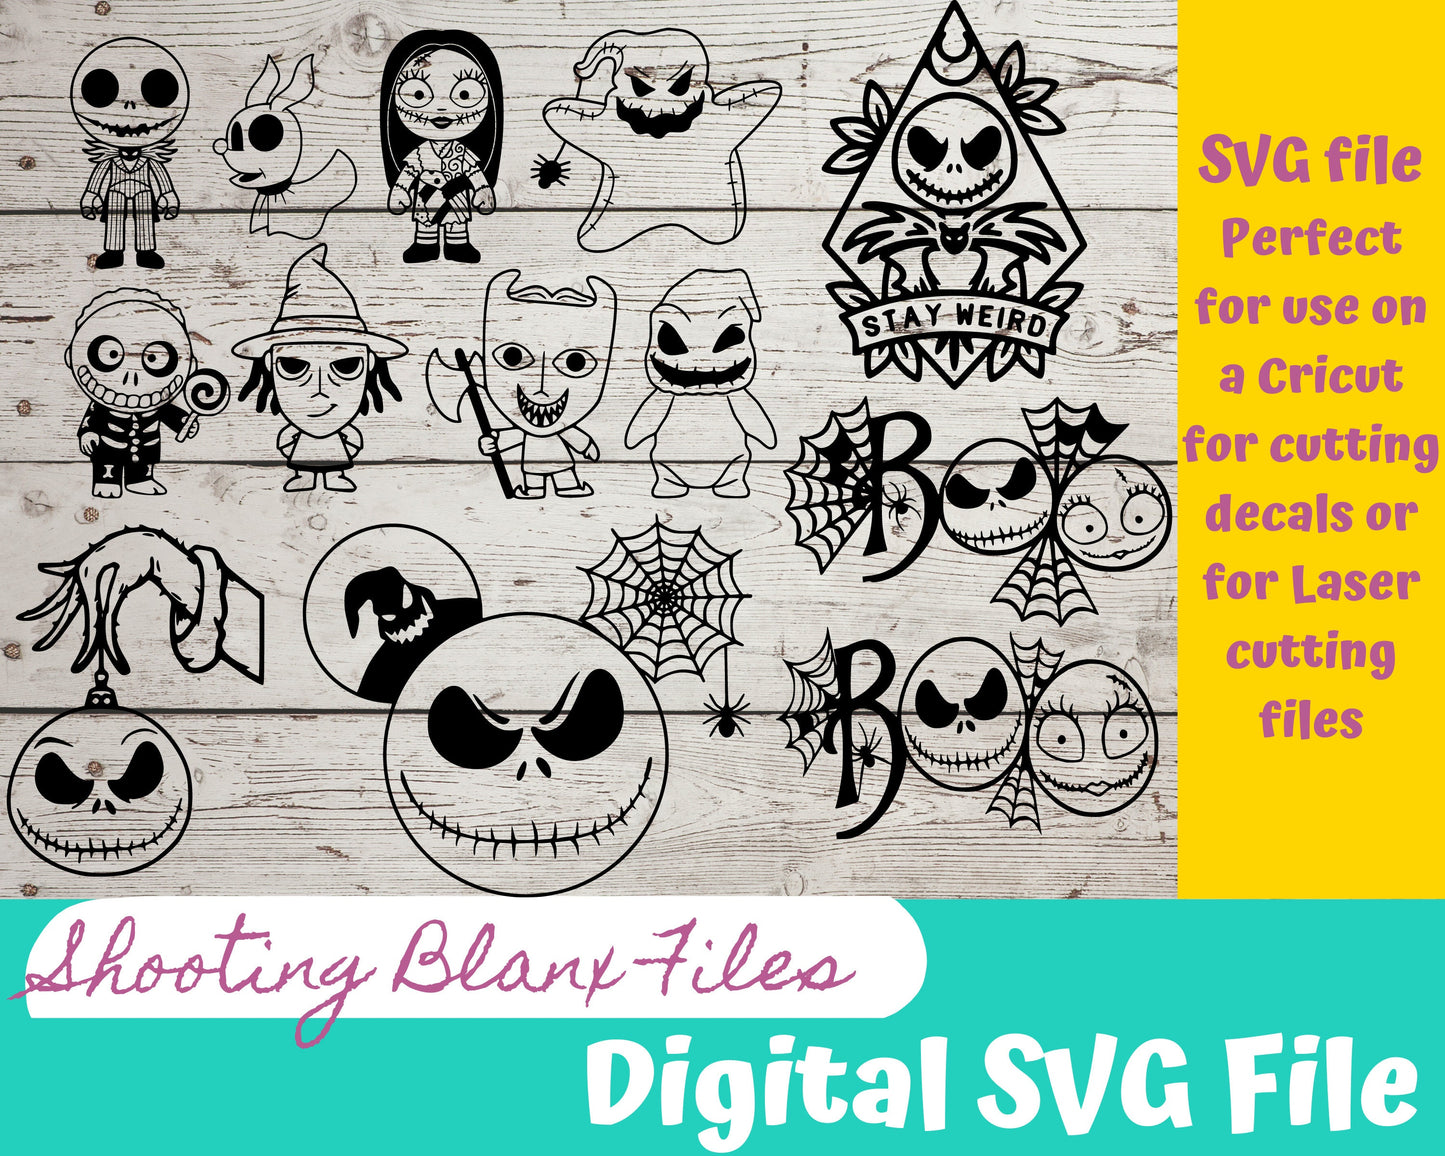 Nightmare b4 Christmas SVG Bundle file perfect for Cricut, Cameo, or Silhouette also for laser engraving Glowforge, Scary, Halloween, Jack